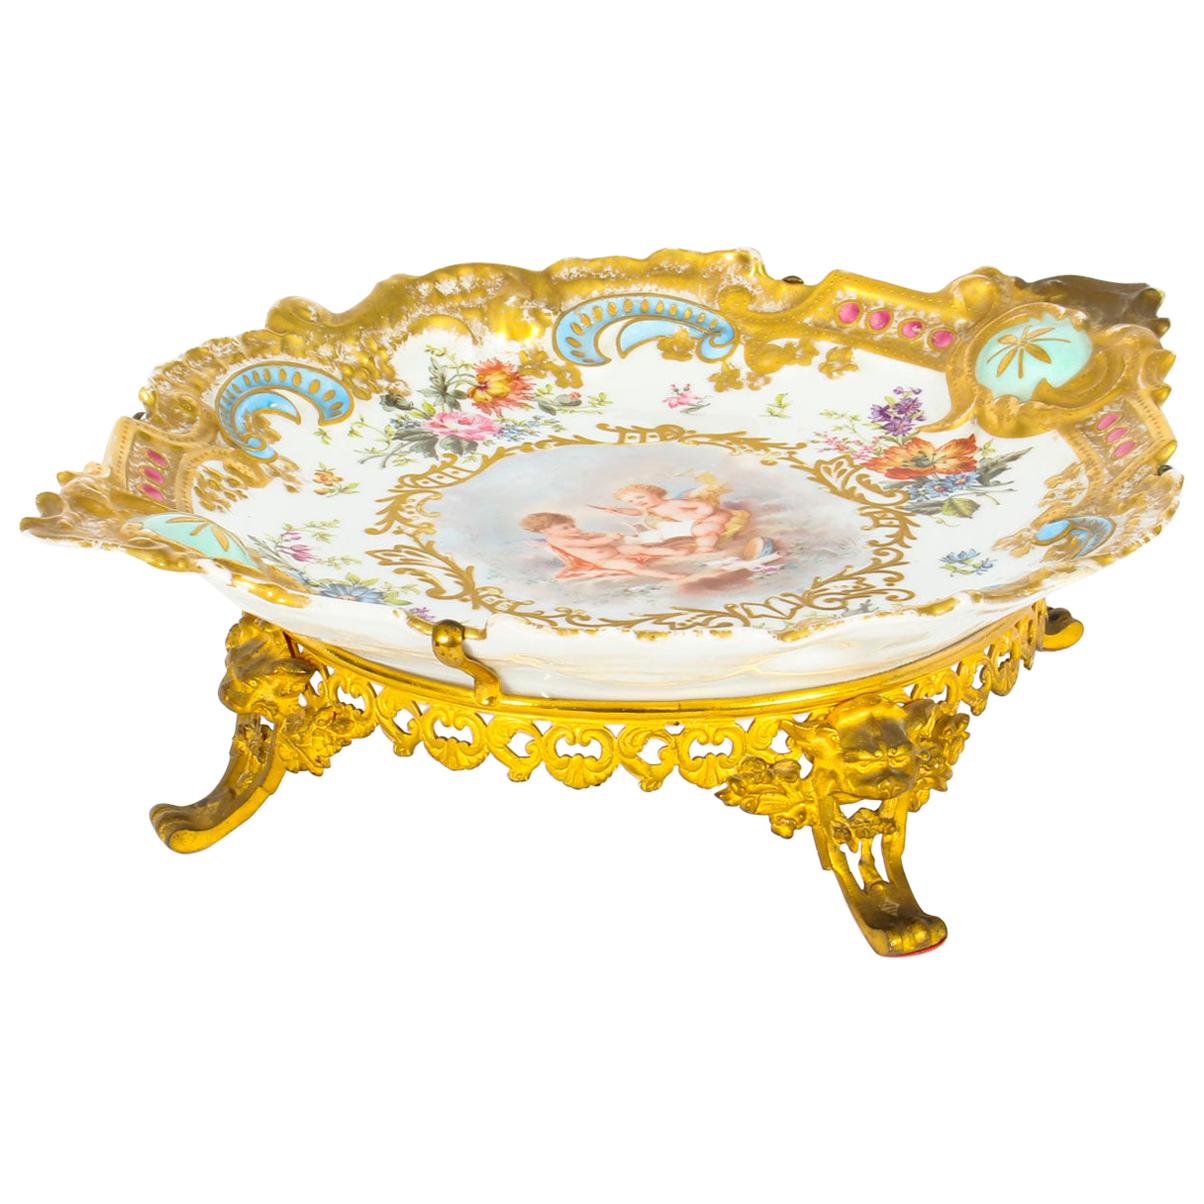 Antique French Porcelain & Ormolu Mounted Centerpiece, Mid-19th Century